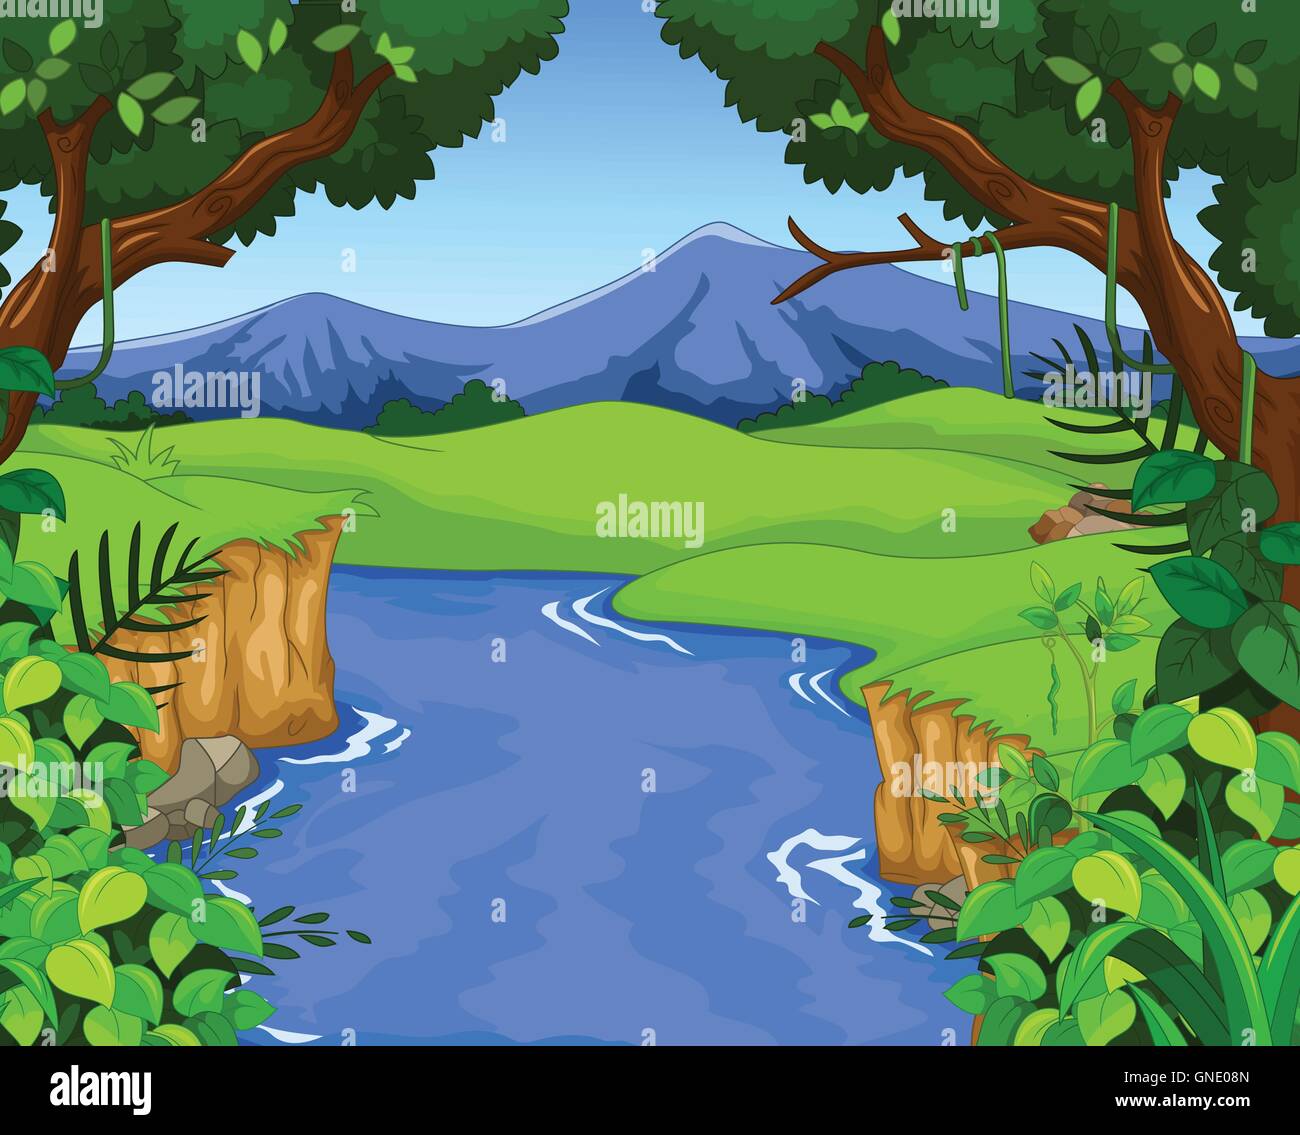 Amazon river Stock Vector Images - Alamy